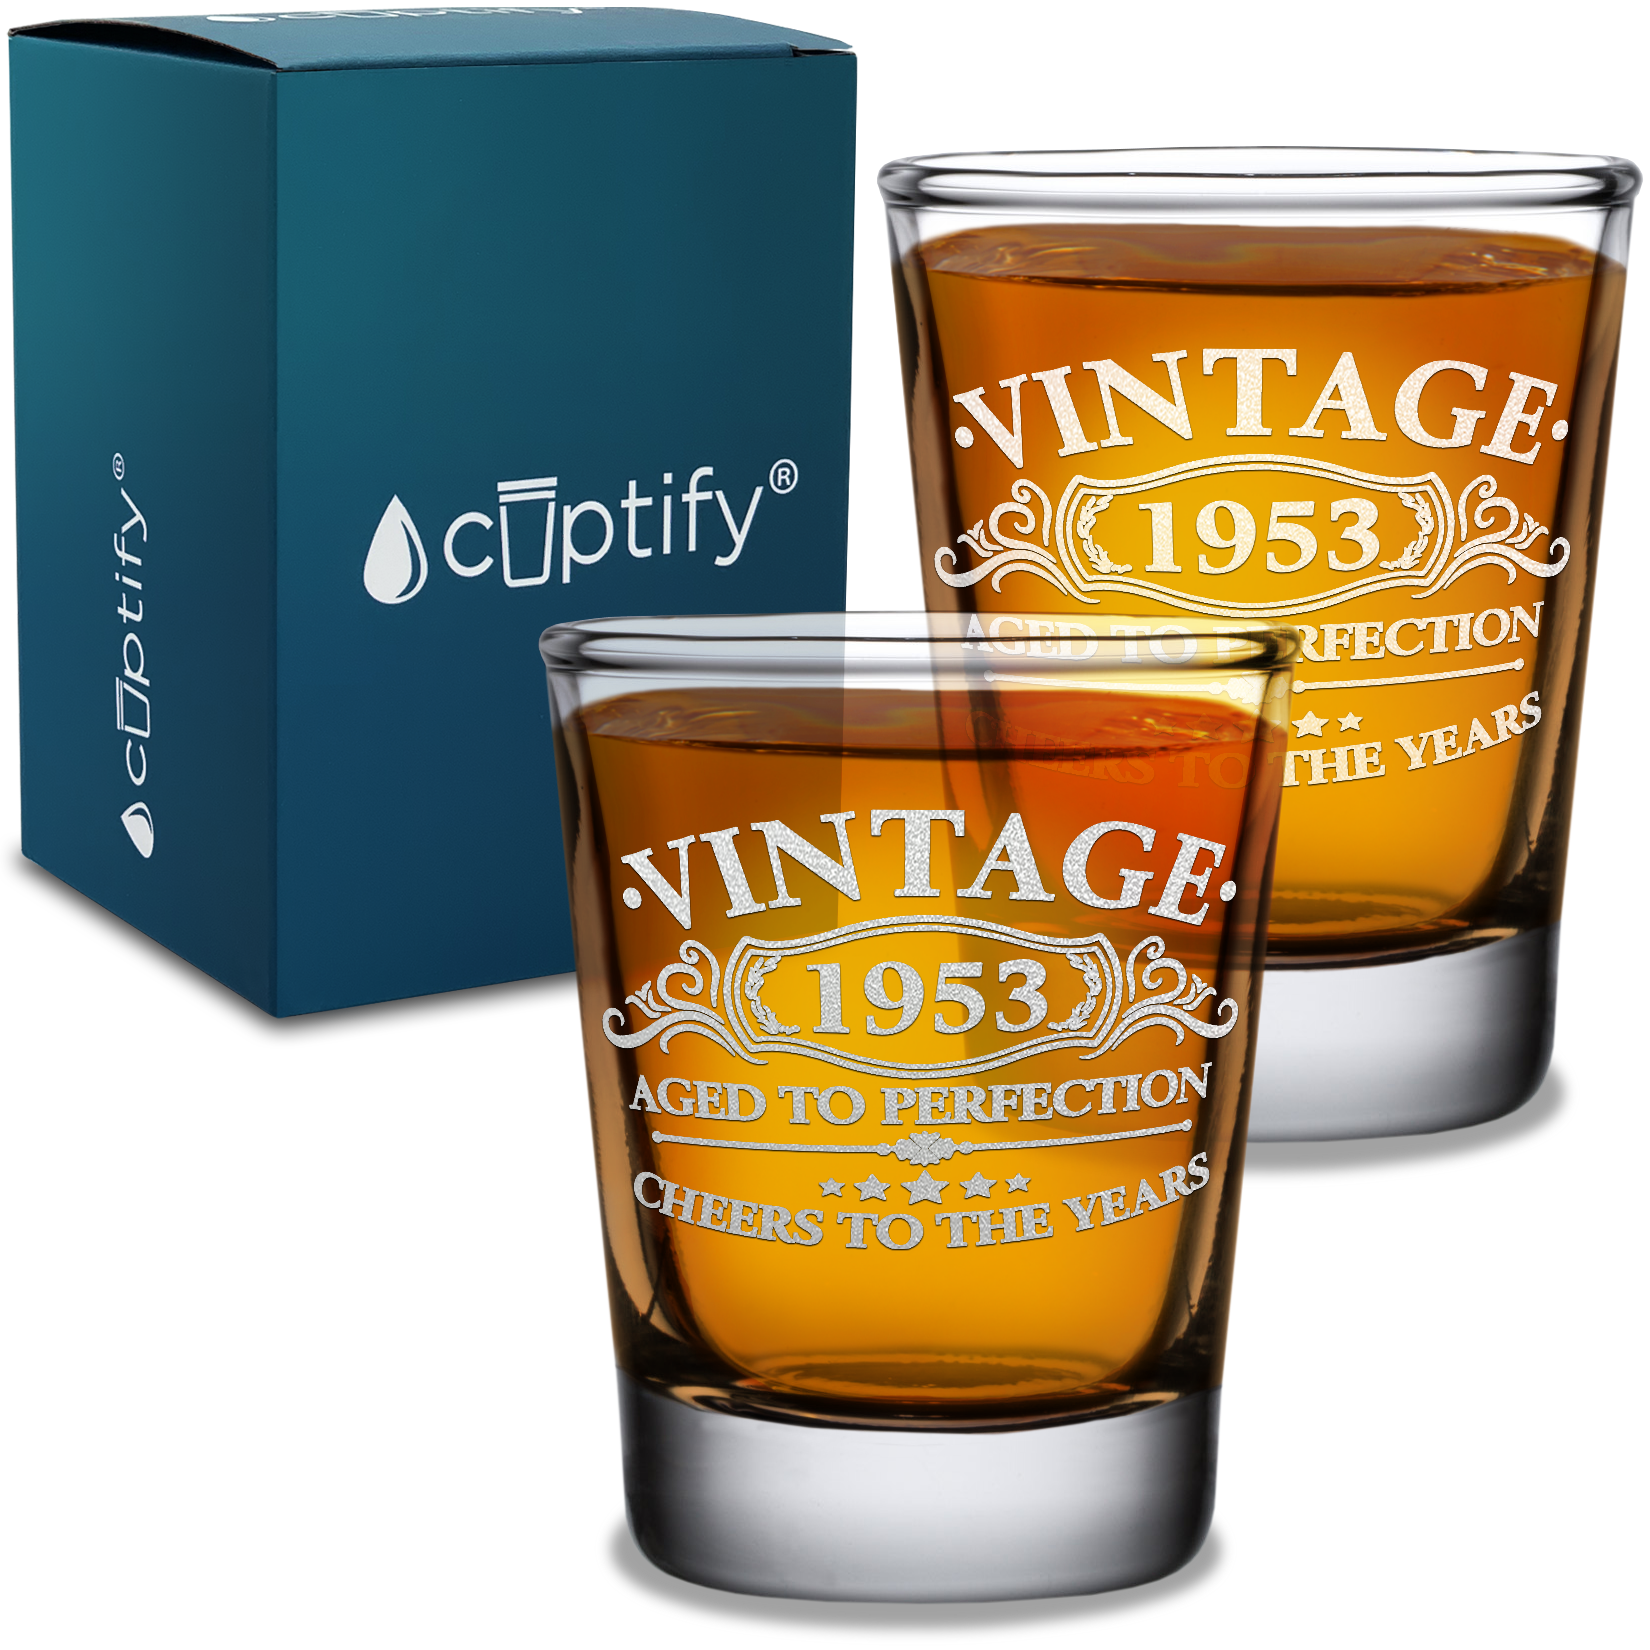 Vintage Aged To Perfection Cheers To 68 Years 1953 Laser Engraved on 2oz Shot Glasses - Set of 2